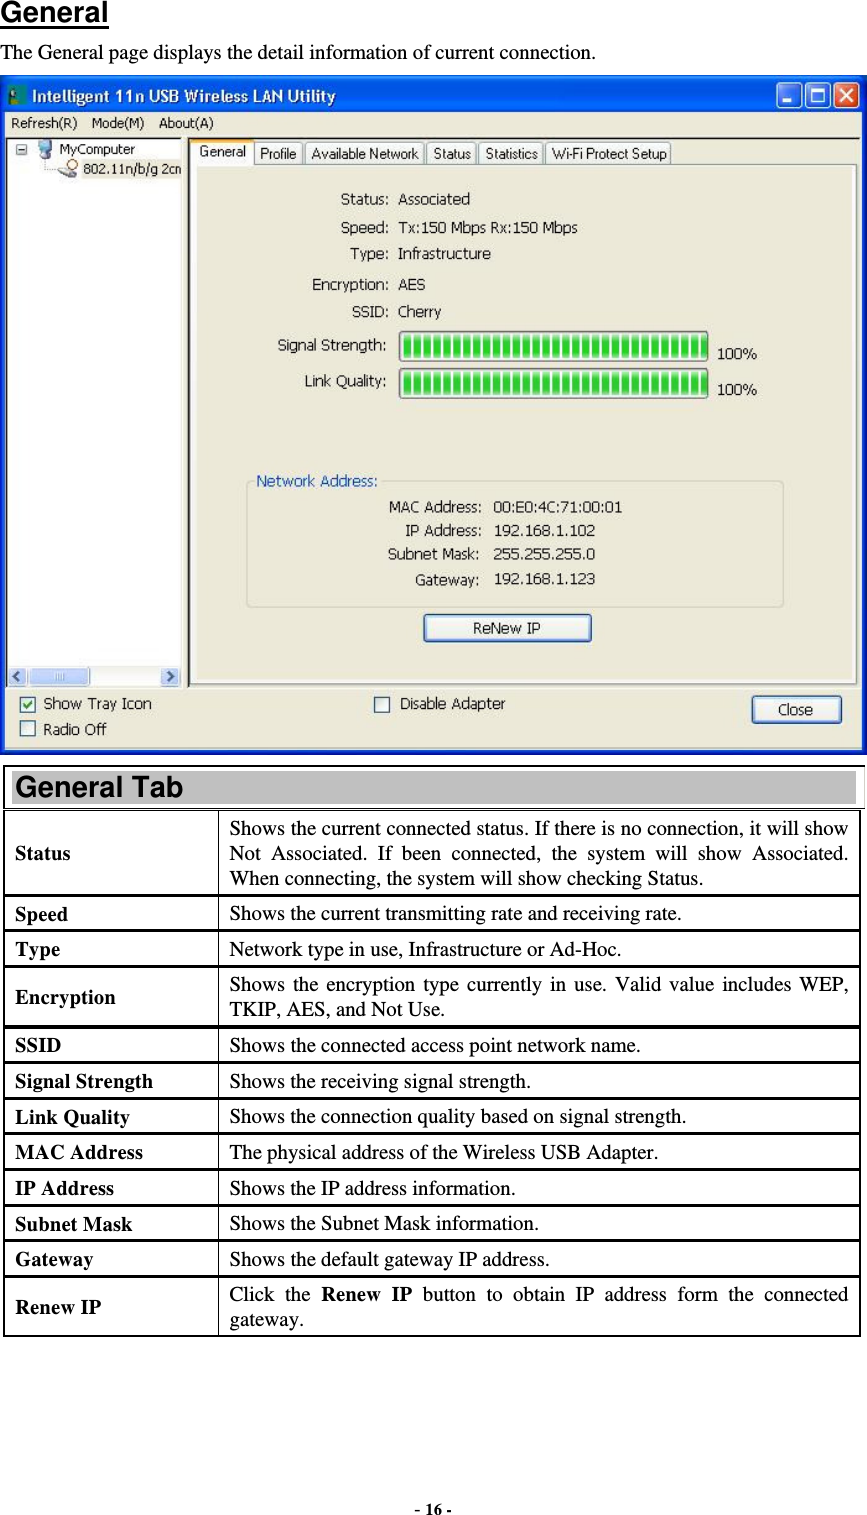  - 16 -  General The General page displays the detail information of current connection.  General Tab Status  Shows the current connected status. If there is no connection, it will show Not Associated. If been connected, the system will show Associated. When connecting, the system will show checking Status. Speed  Shows the current transmitting rate and receiving rate. Type  Network type in use, Infrastructure or Ad-Hoc. Encryption  Shows the encryption type currently in use. Valid value includes WEP, TKIP, AES, and Not Use. SSID  Shows the connected access point network name. Signal Strength  Shows the receiving signal strength. Link Quality  Shows the connection quality based on signal strength. MAC Address  The physical address of the Wireless USB Adapter. IP Address  Shows the IP address information. Subnet Mask  Shows the Subnet Mask information. Gateway  Shows the default gateway IP address. Renew IP  Click the Renew IP button to obtain IP address form the connected gateway. 